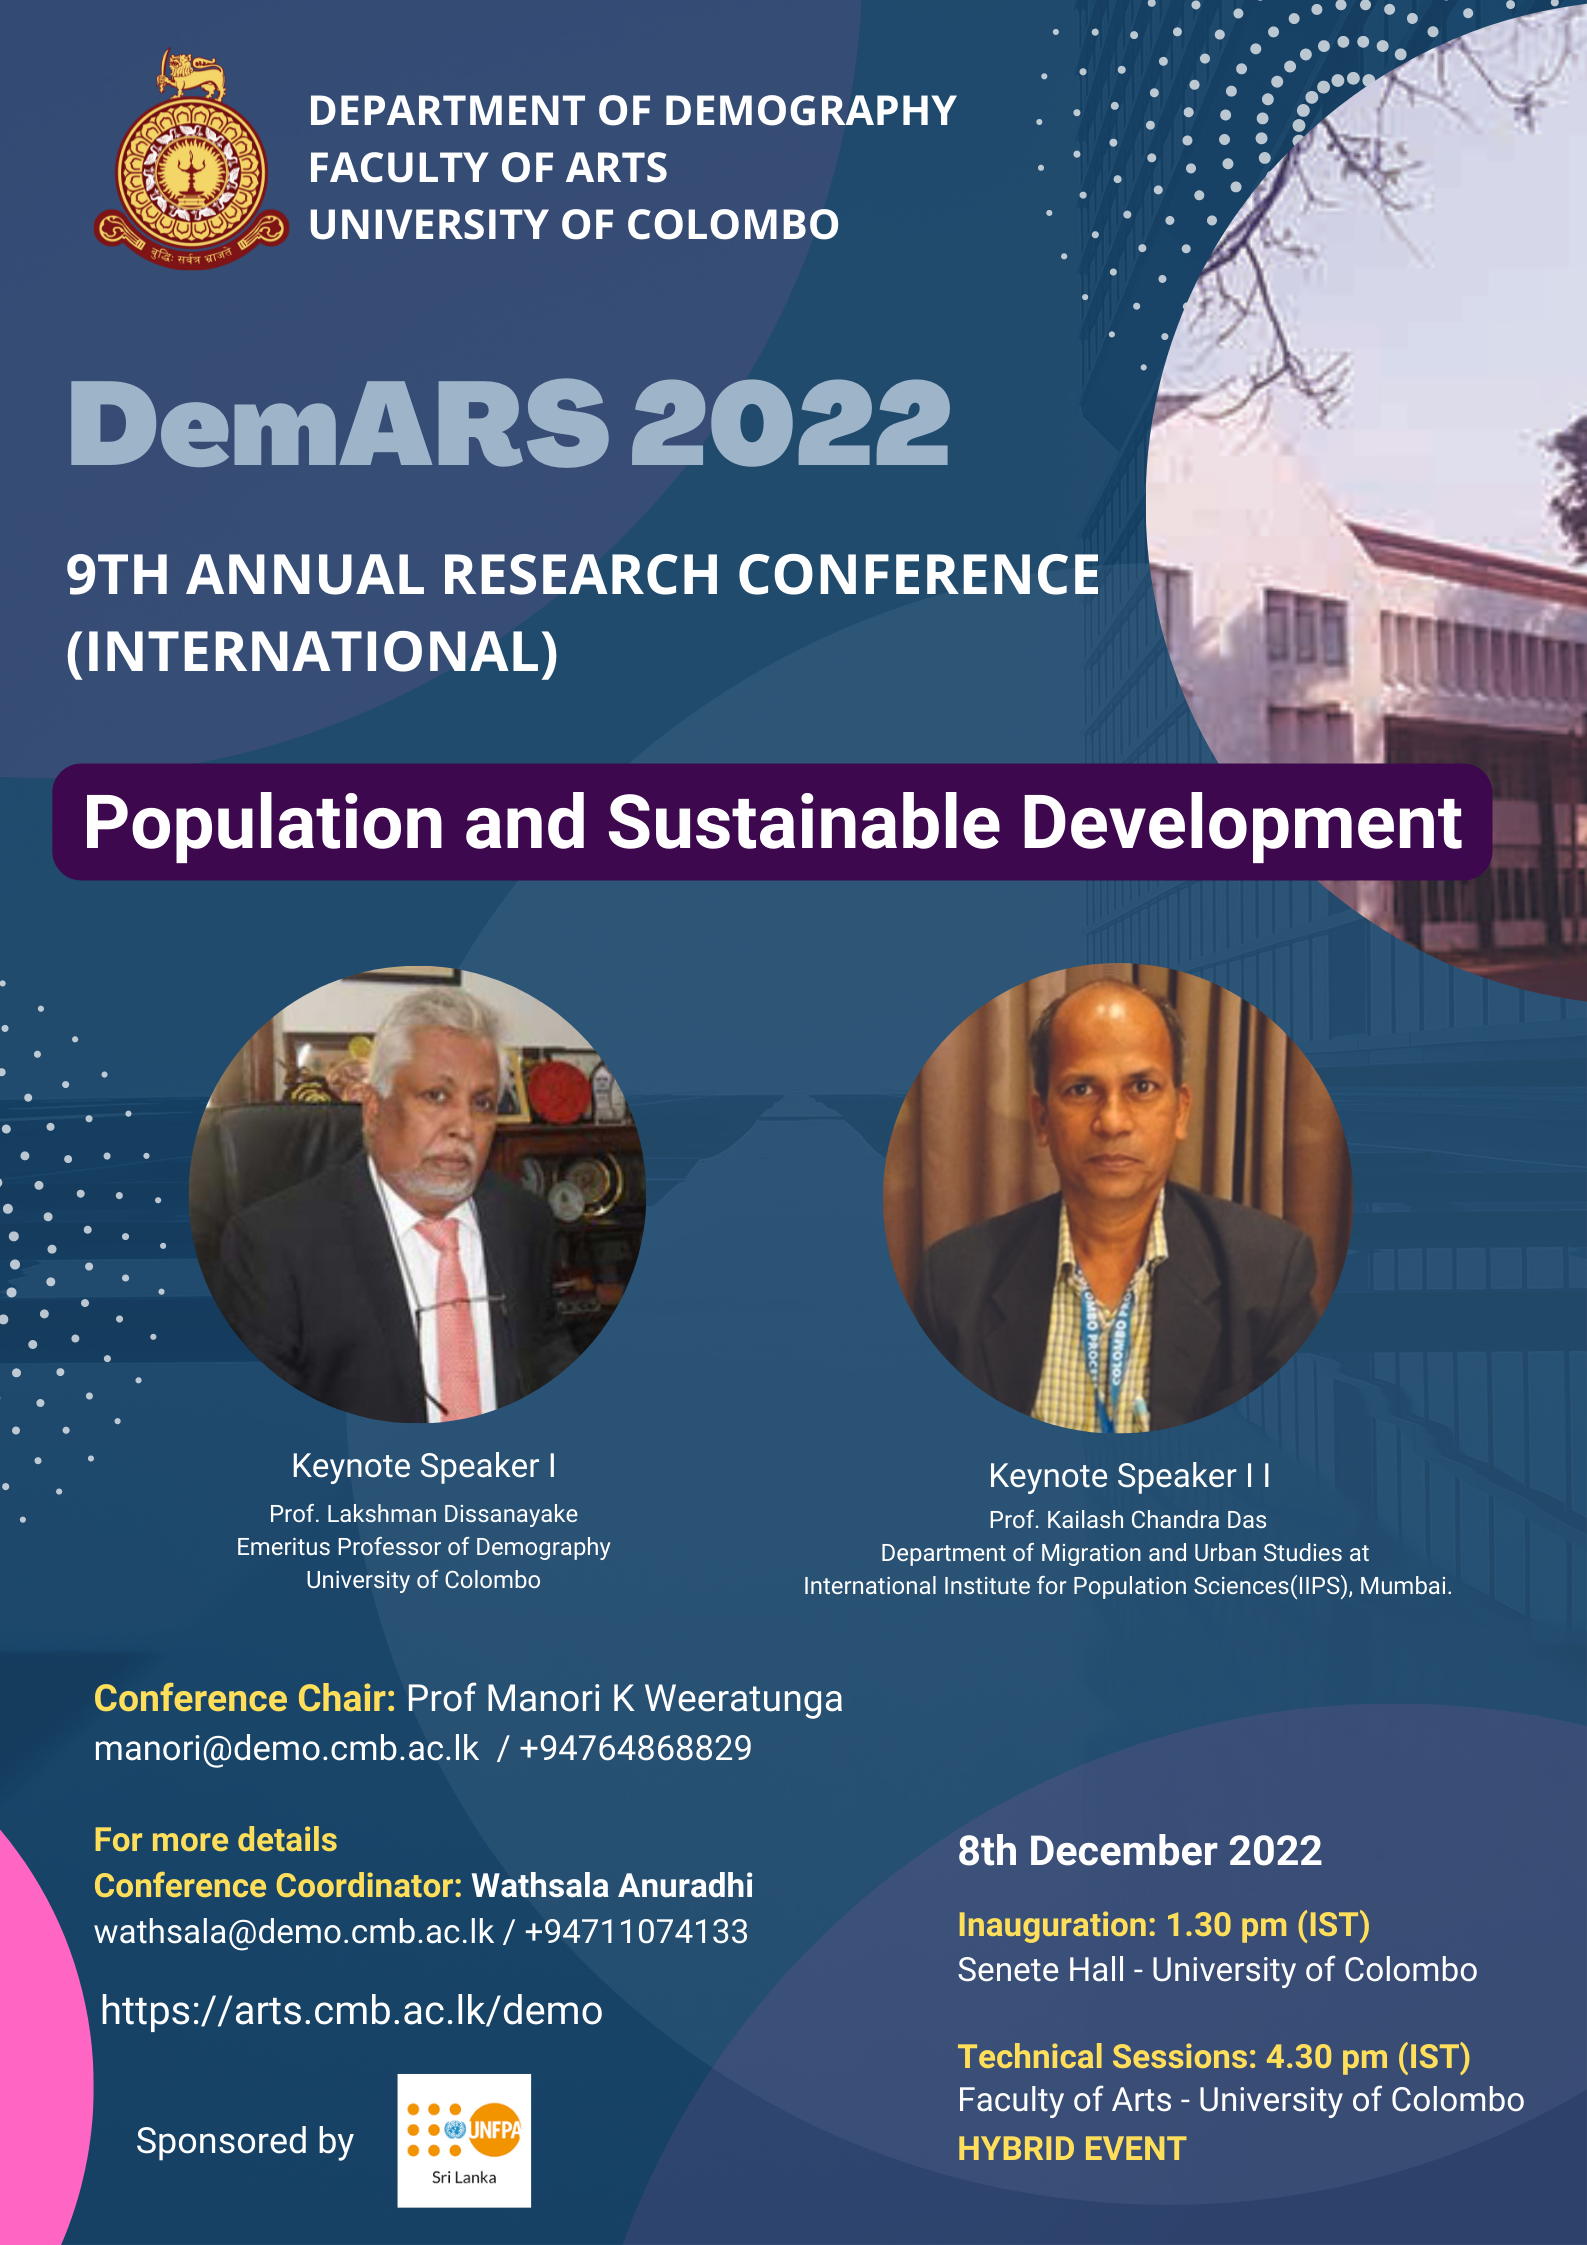 09th Annual Research Conference (International) – DemARS 2022